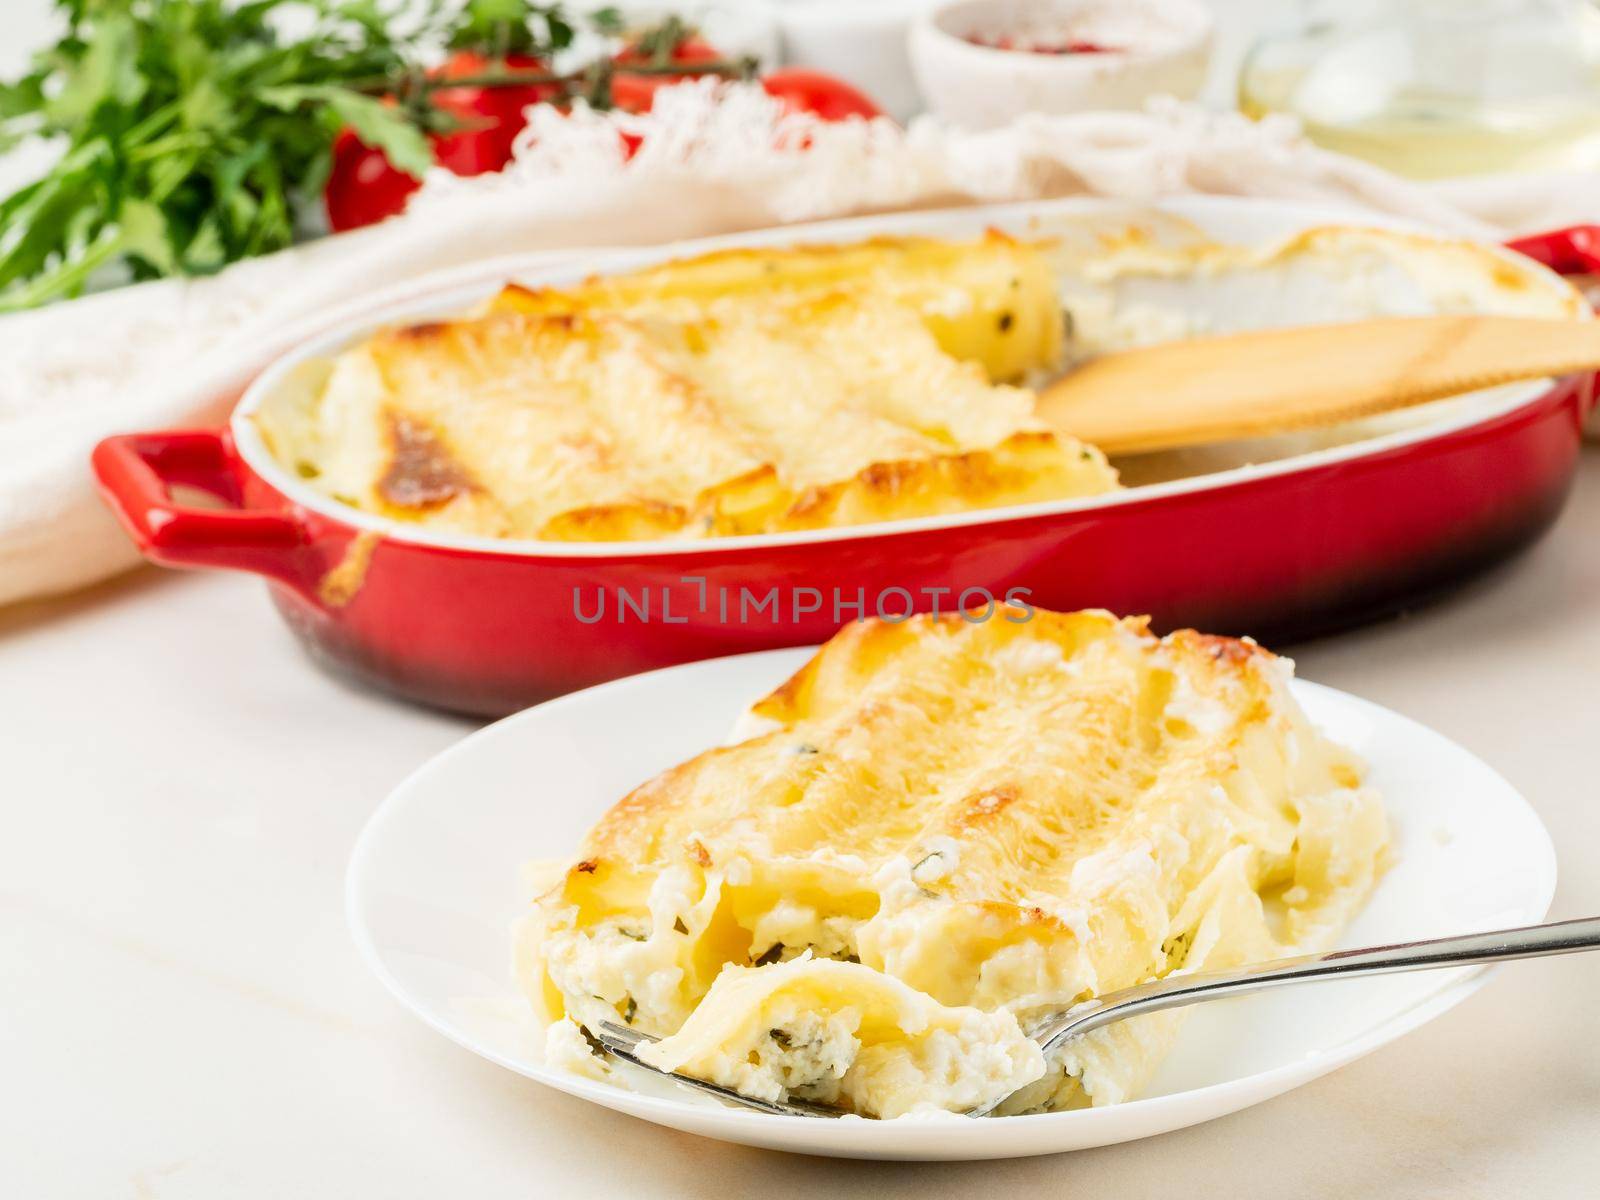 Cannelloni with filling of ricotta and parsley, baked with b chamel sauce by NataBene